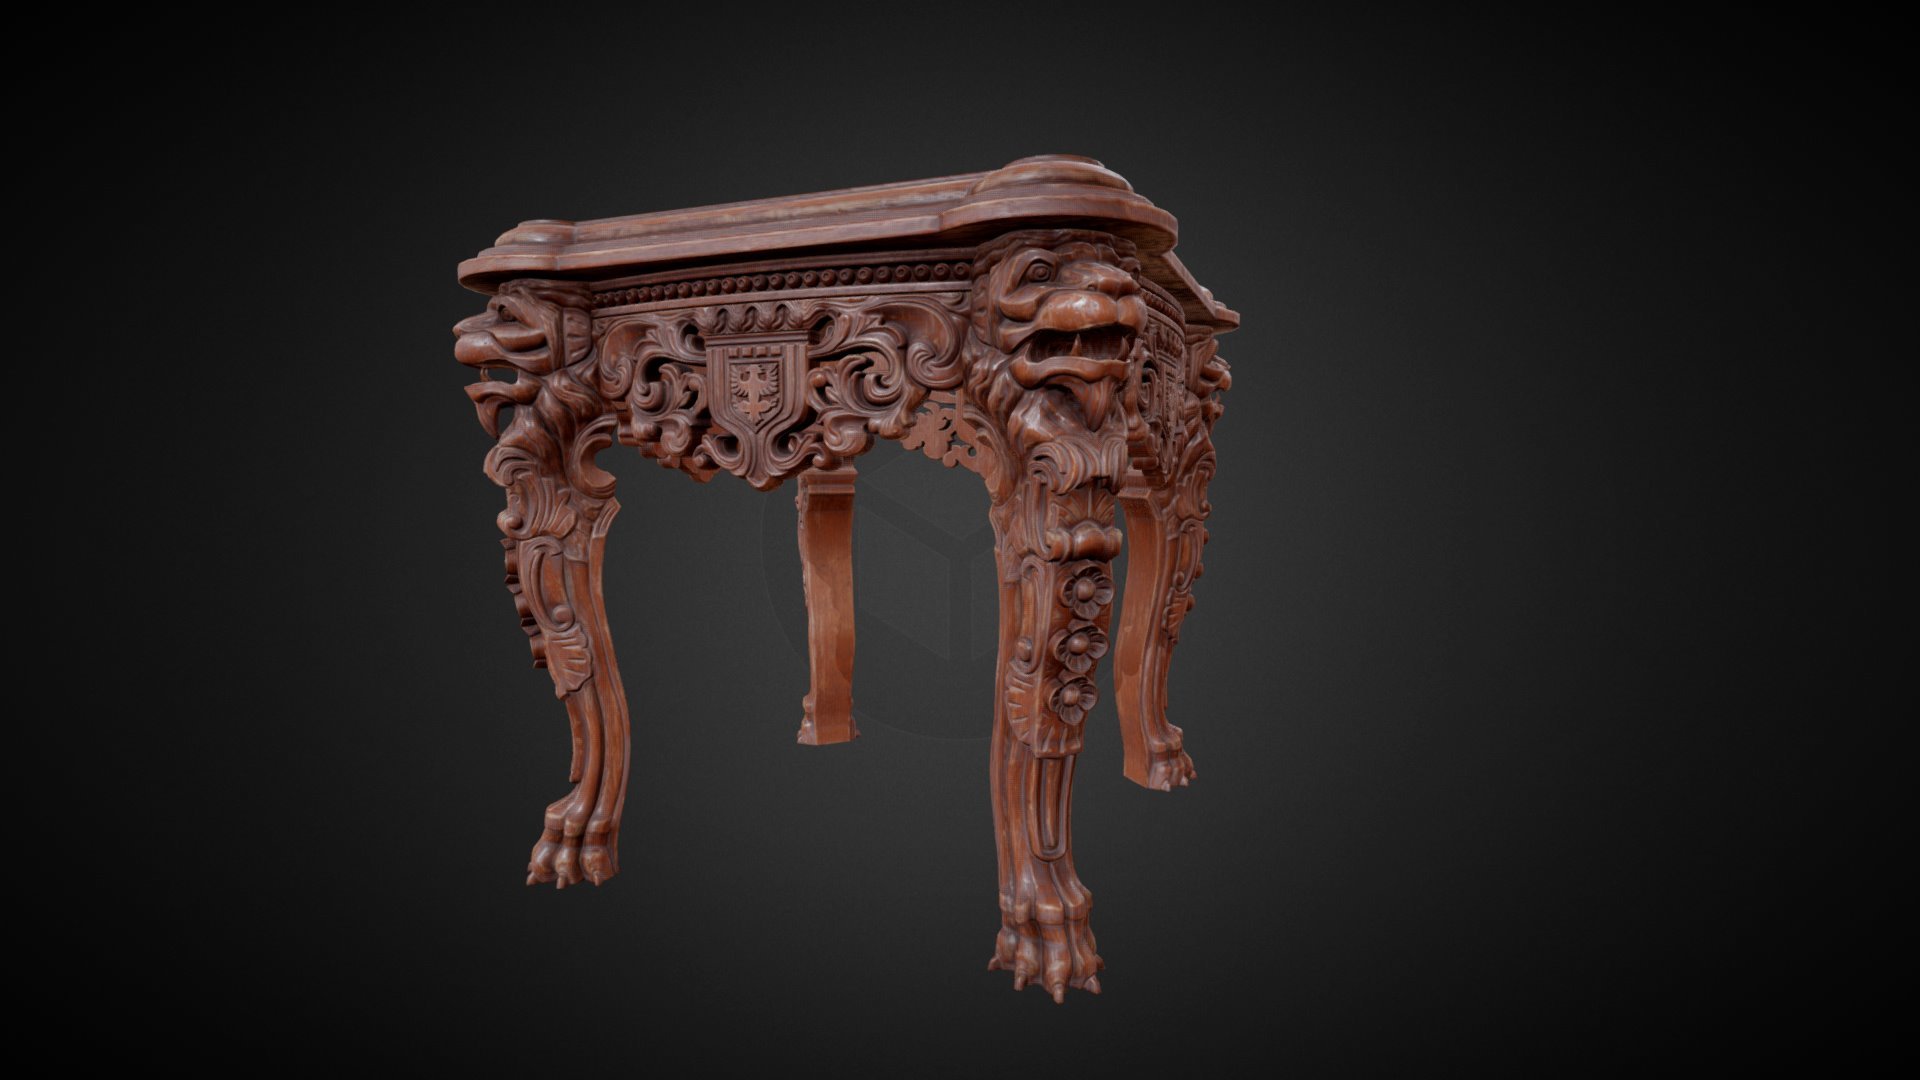 Hi
Used 3ds max / Zbrush / Substance Painter
thank you - Lion Table - 3D model by mreggx 3d model